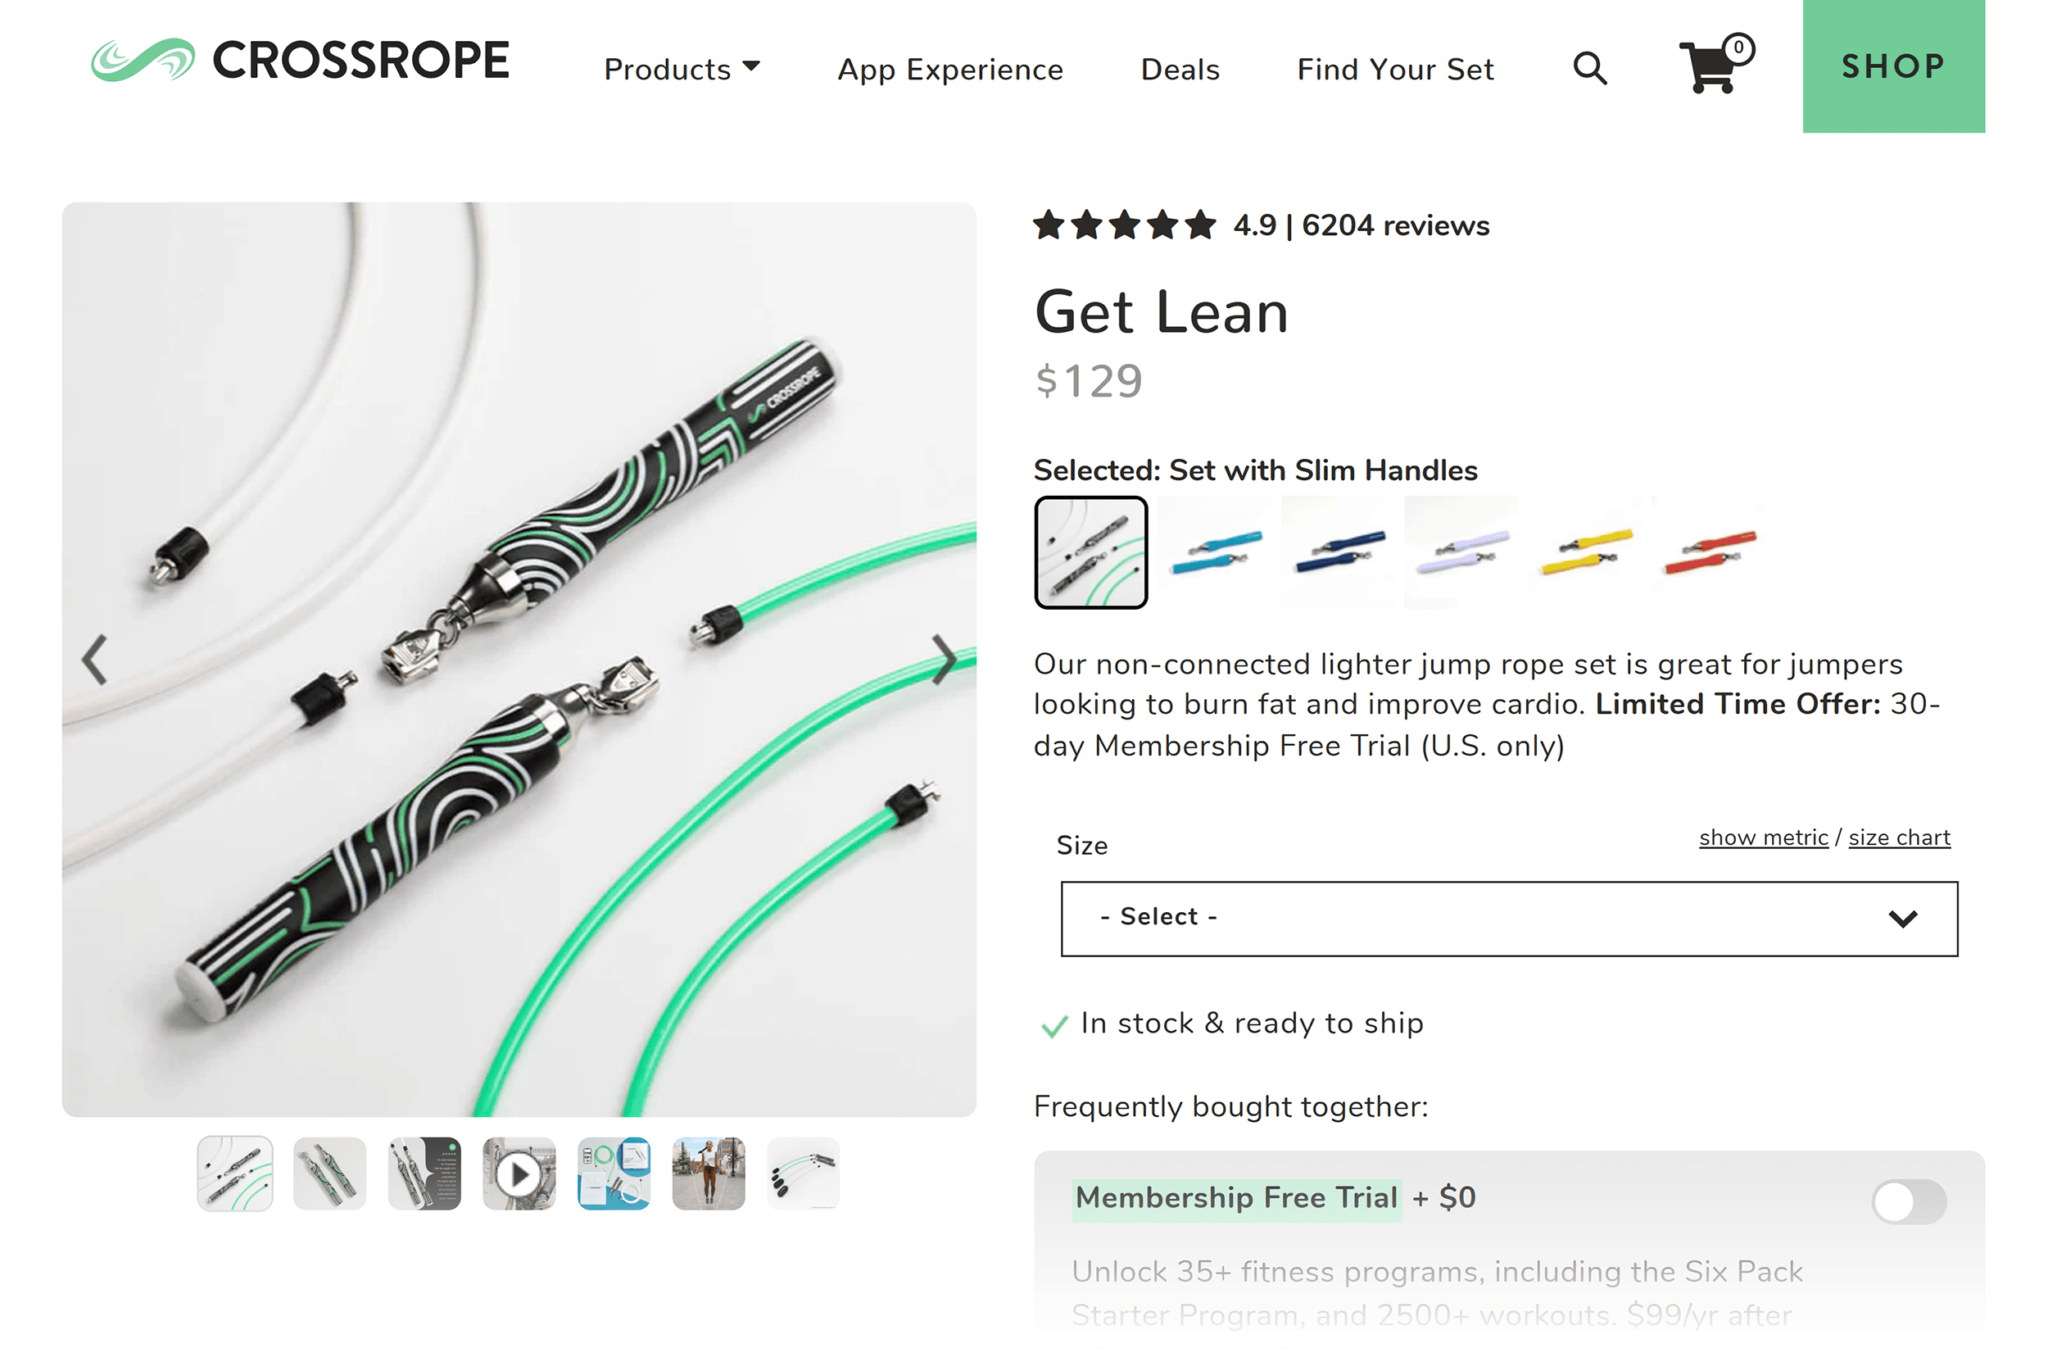 crossrope-lean-jump-rope 20 Effective Product Page Examples (+ Best Practices)